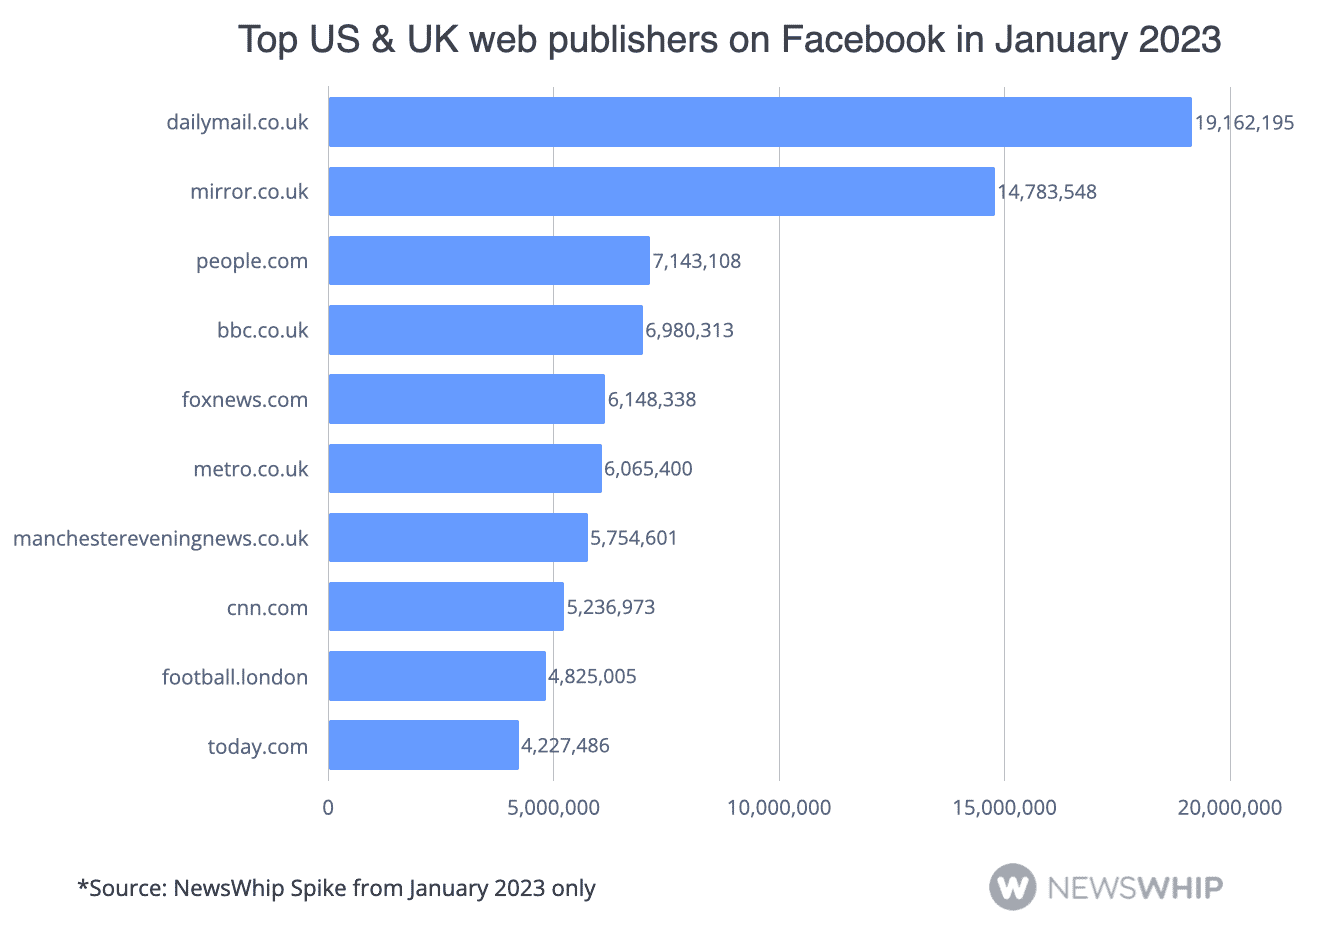 Graph showing the top publishers on Facebook in January 2023 from the UK and US, ranked by engagement